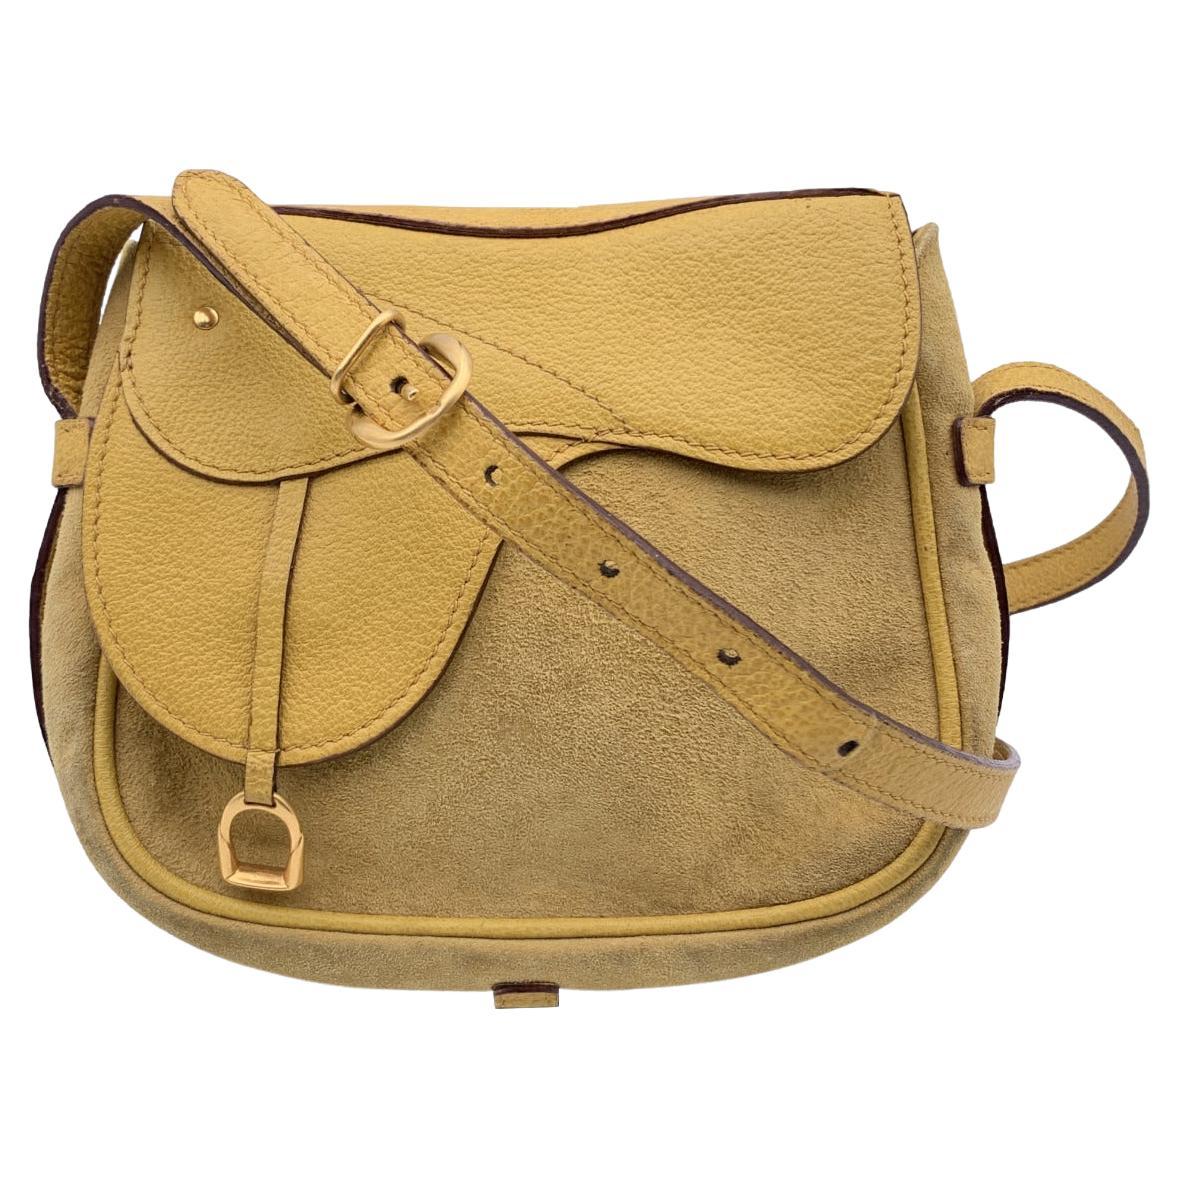 Gucci Vintage Yellow Leather Suede Saddle Convertible Belt Bag